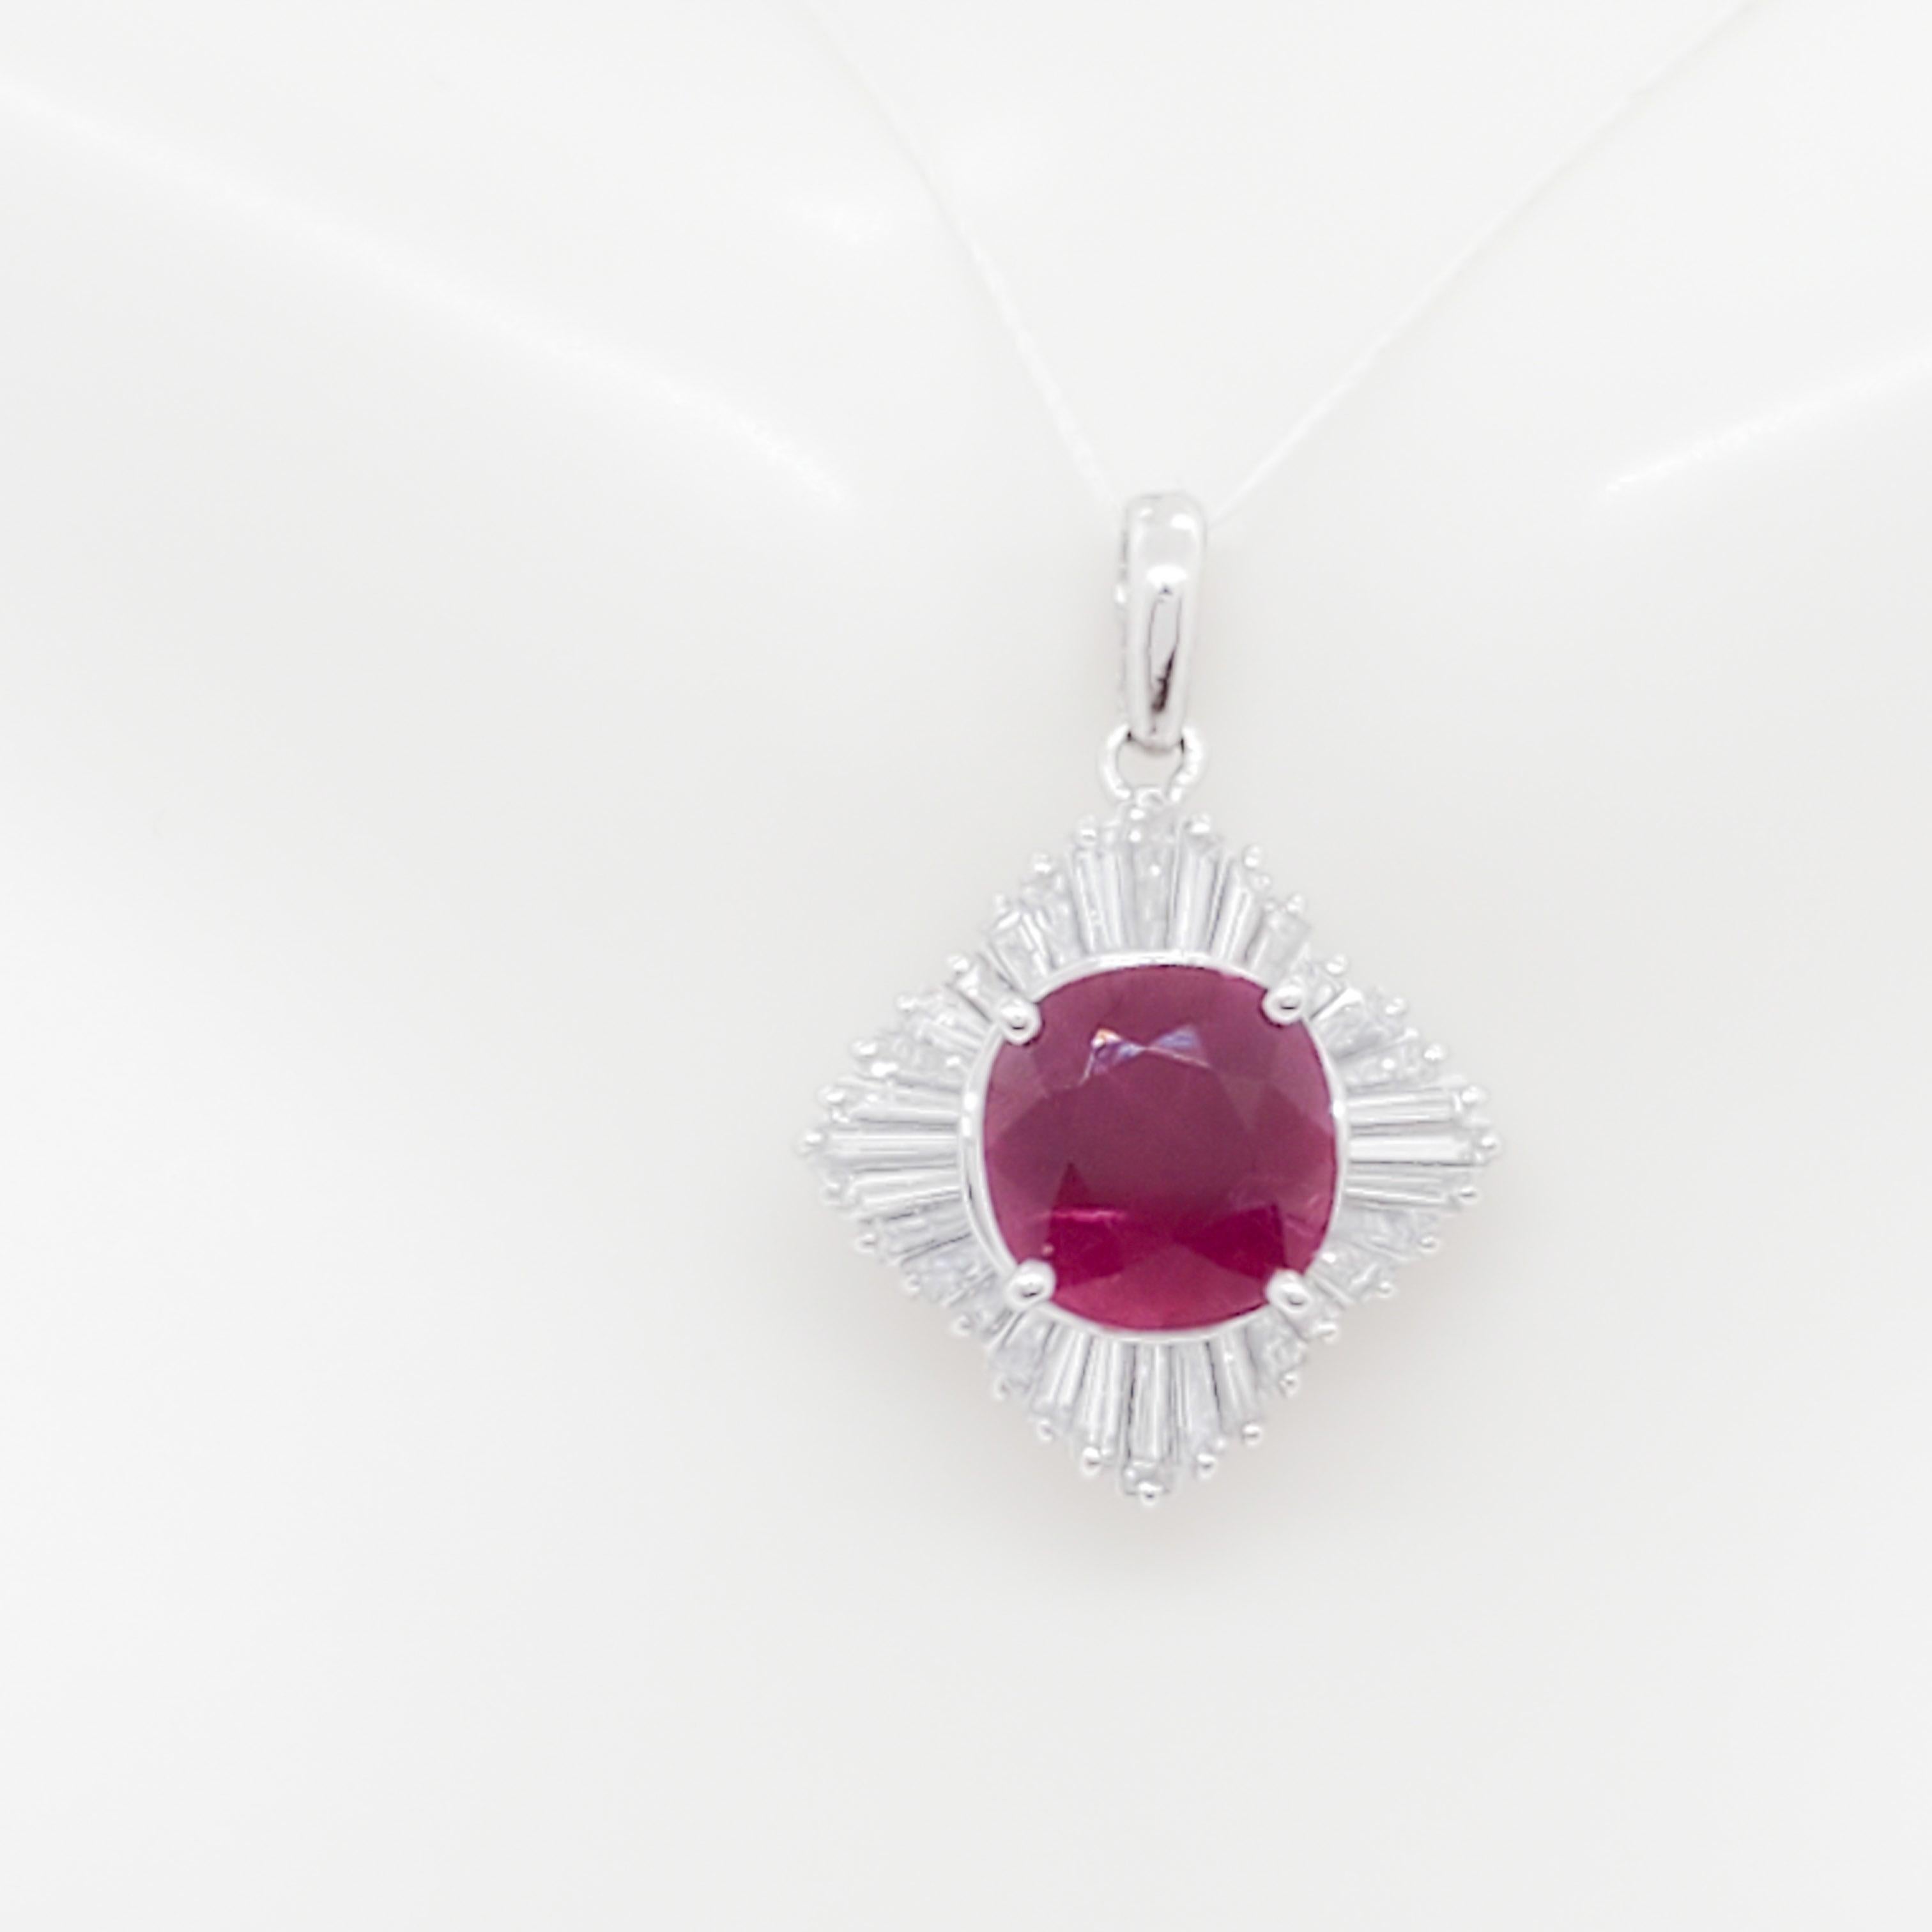 Gorgeous 2.76 ct. Burmese ruby cushion with 0.76 ct. white diamond baguettes.  Handmade in platinum.  GIA report included.